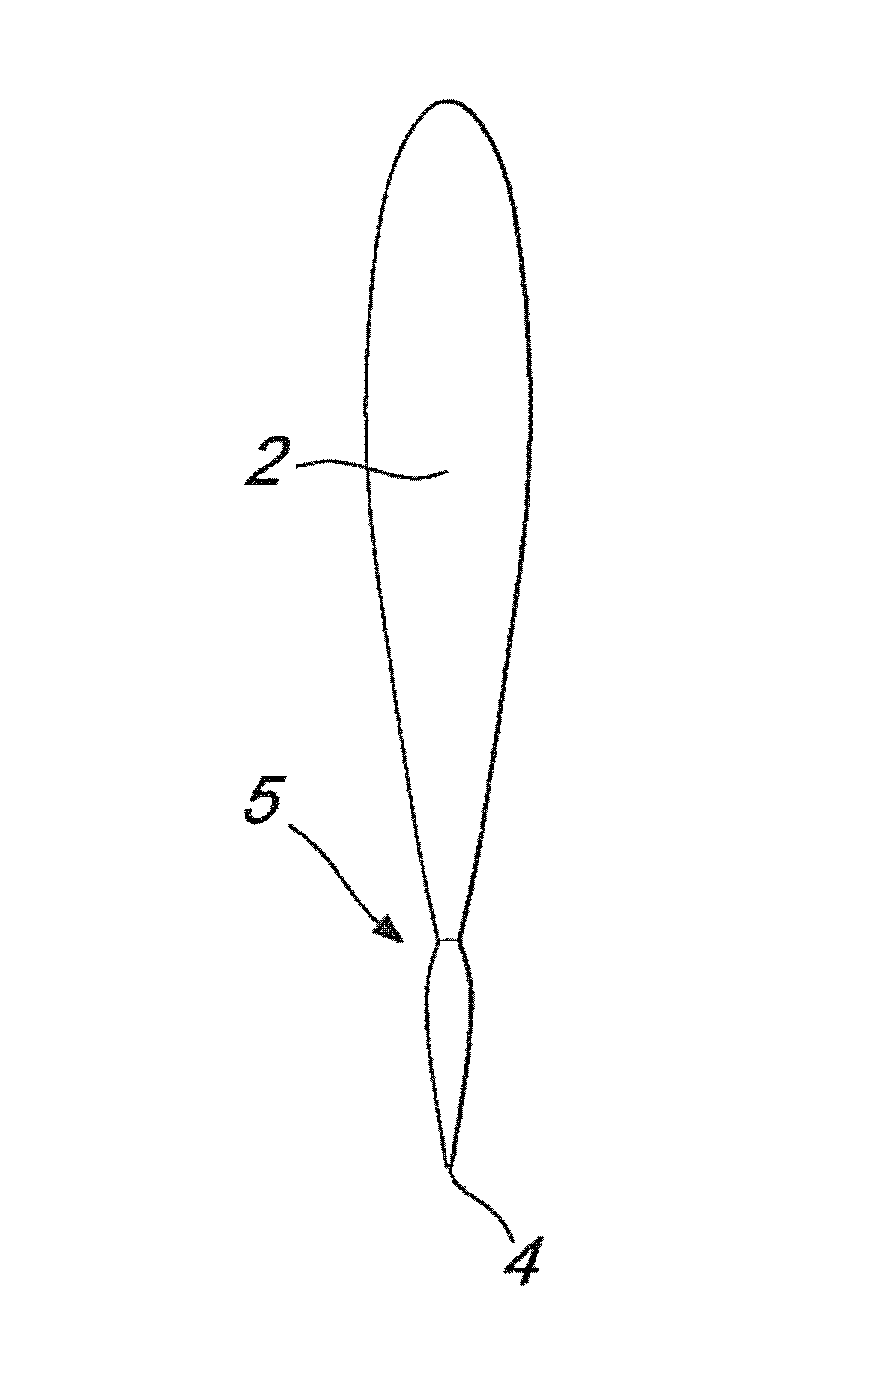 Surgical instrument for operations on the spinal column